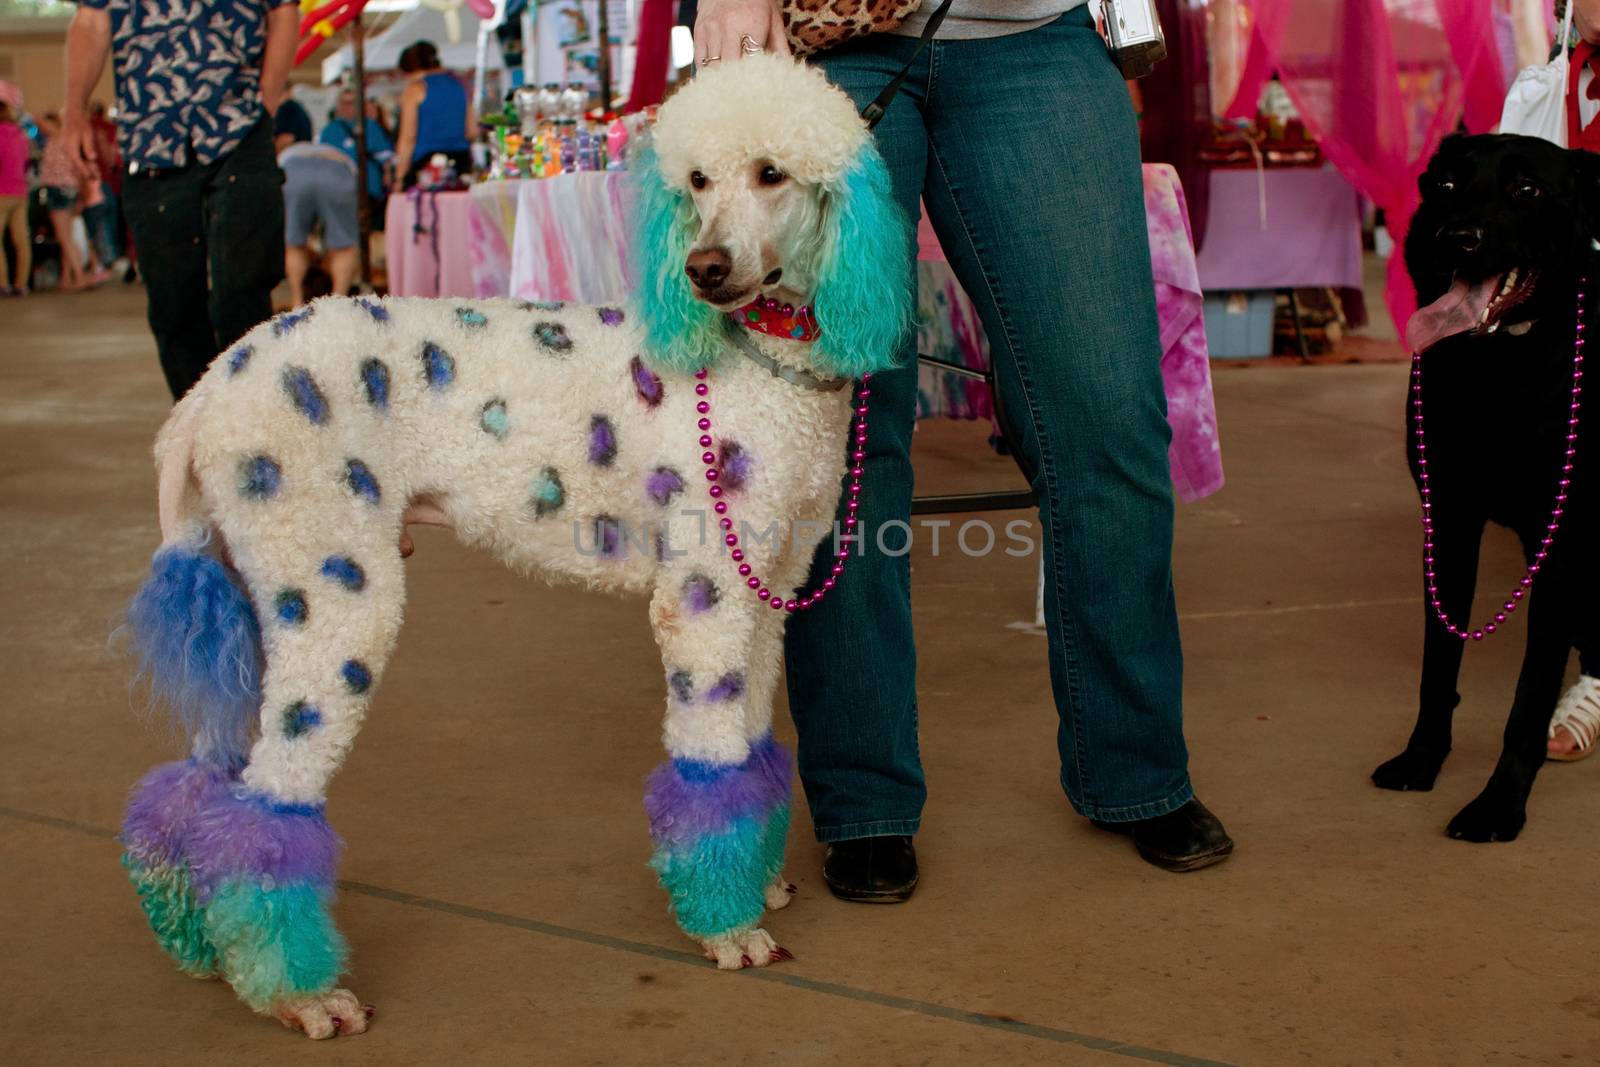 Poodle Dyed With Polka Dots And Colors At Festival by BluIz60